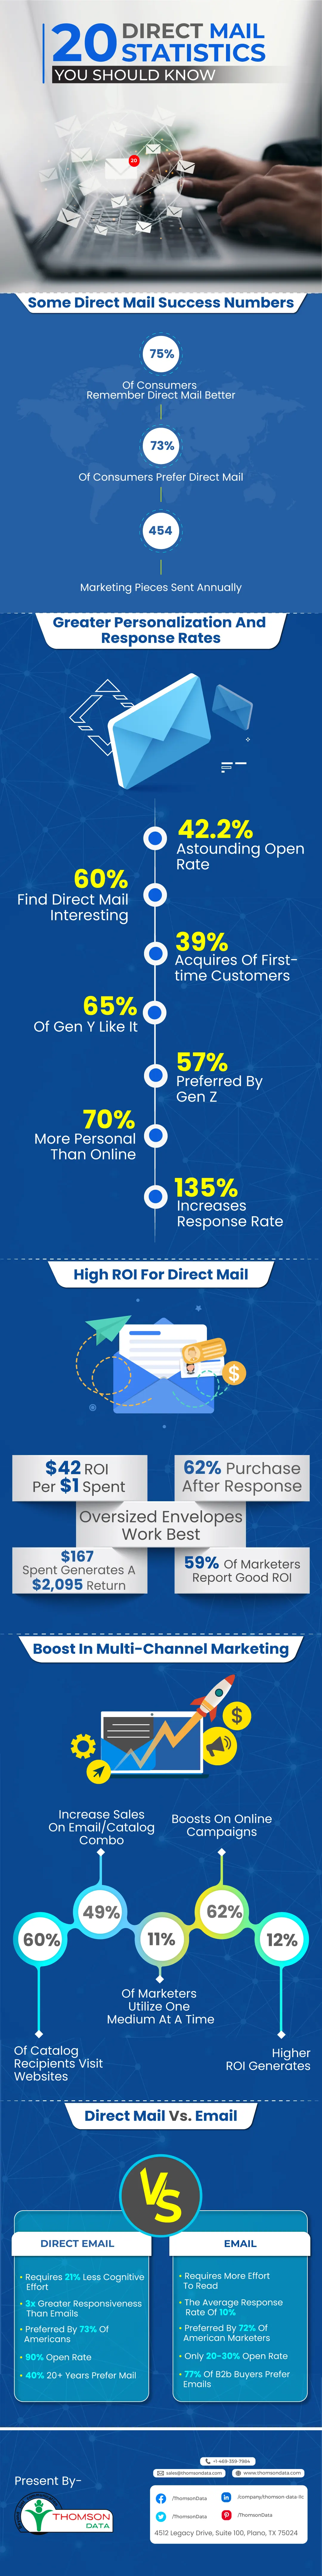 20 Direct Mail Statistics You Should Know